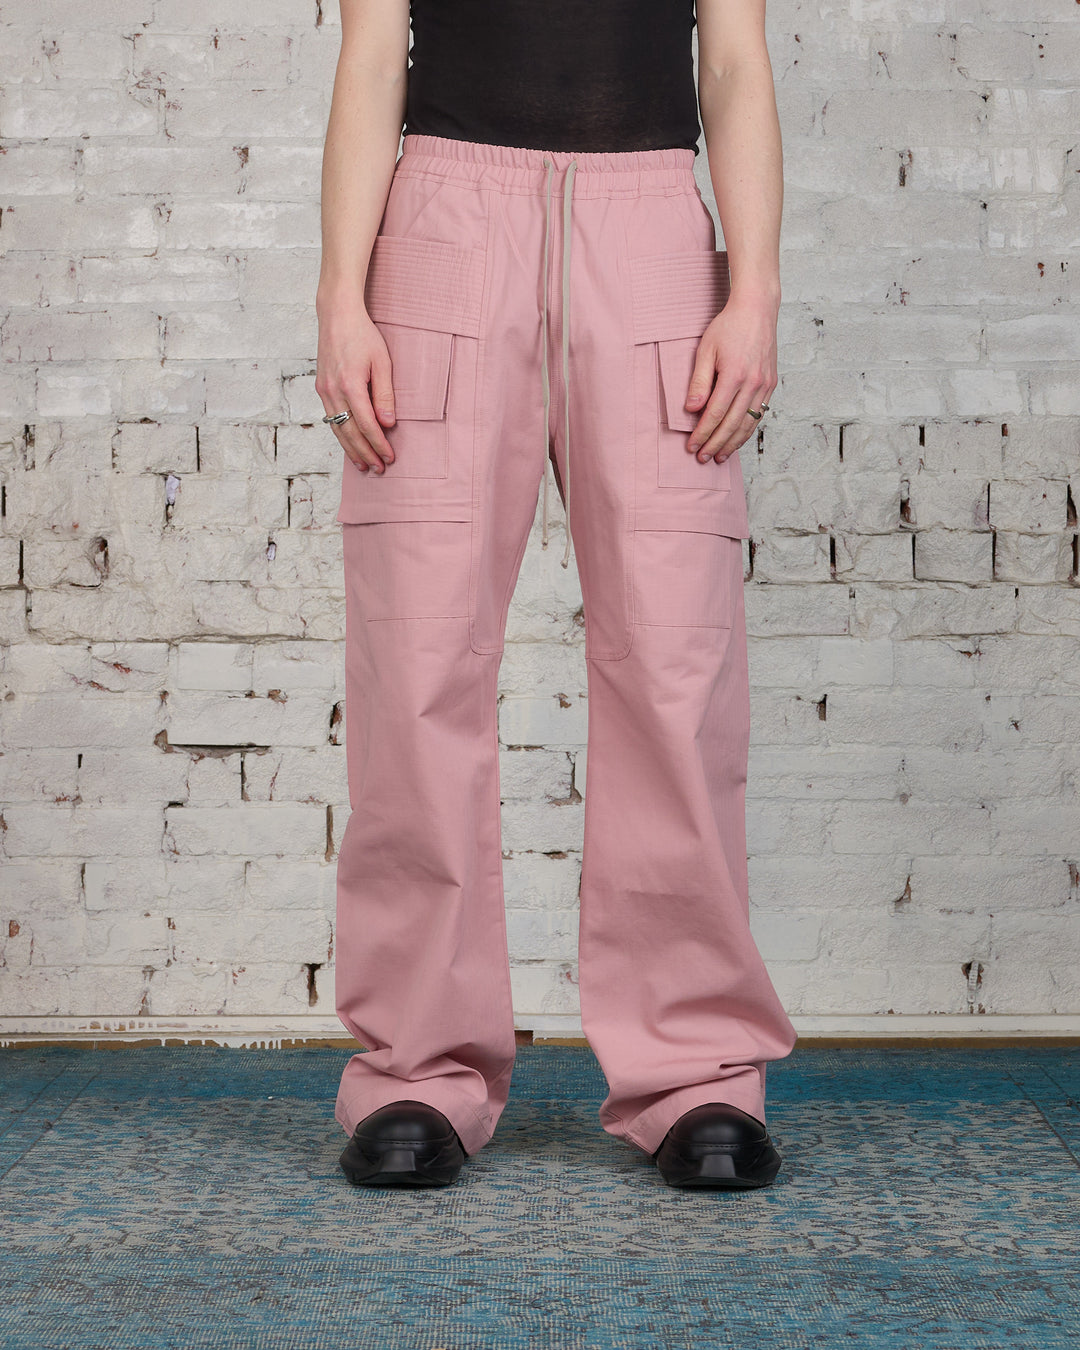 Rick Owens DRKSHDW Creatch Cargo Pant Ripstop Faded Pink